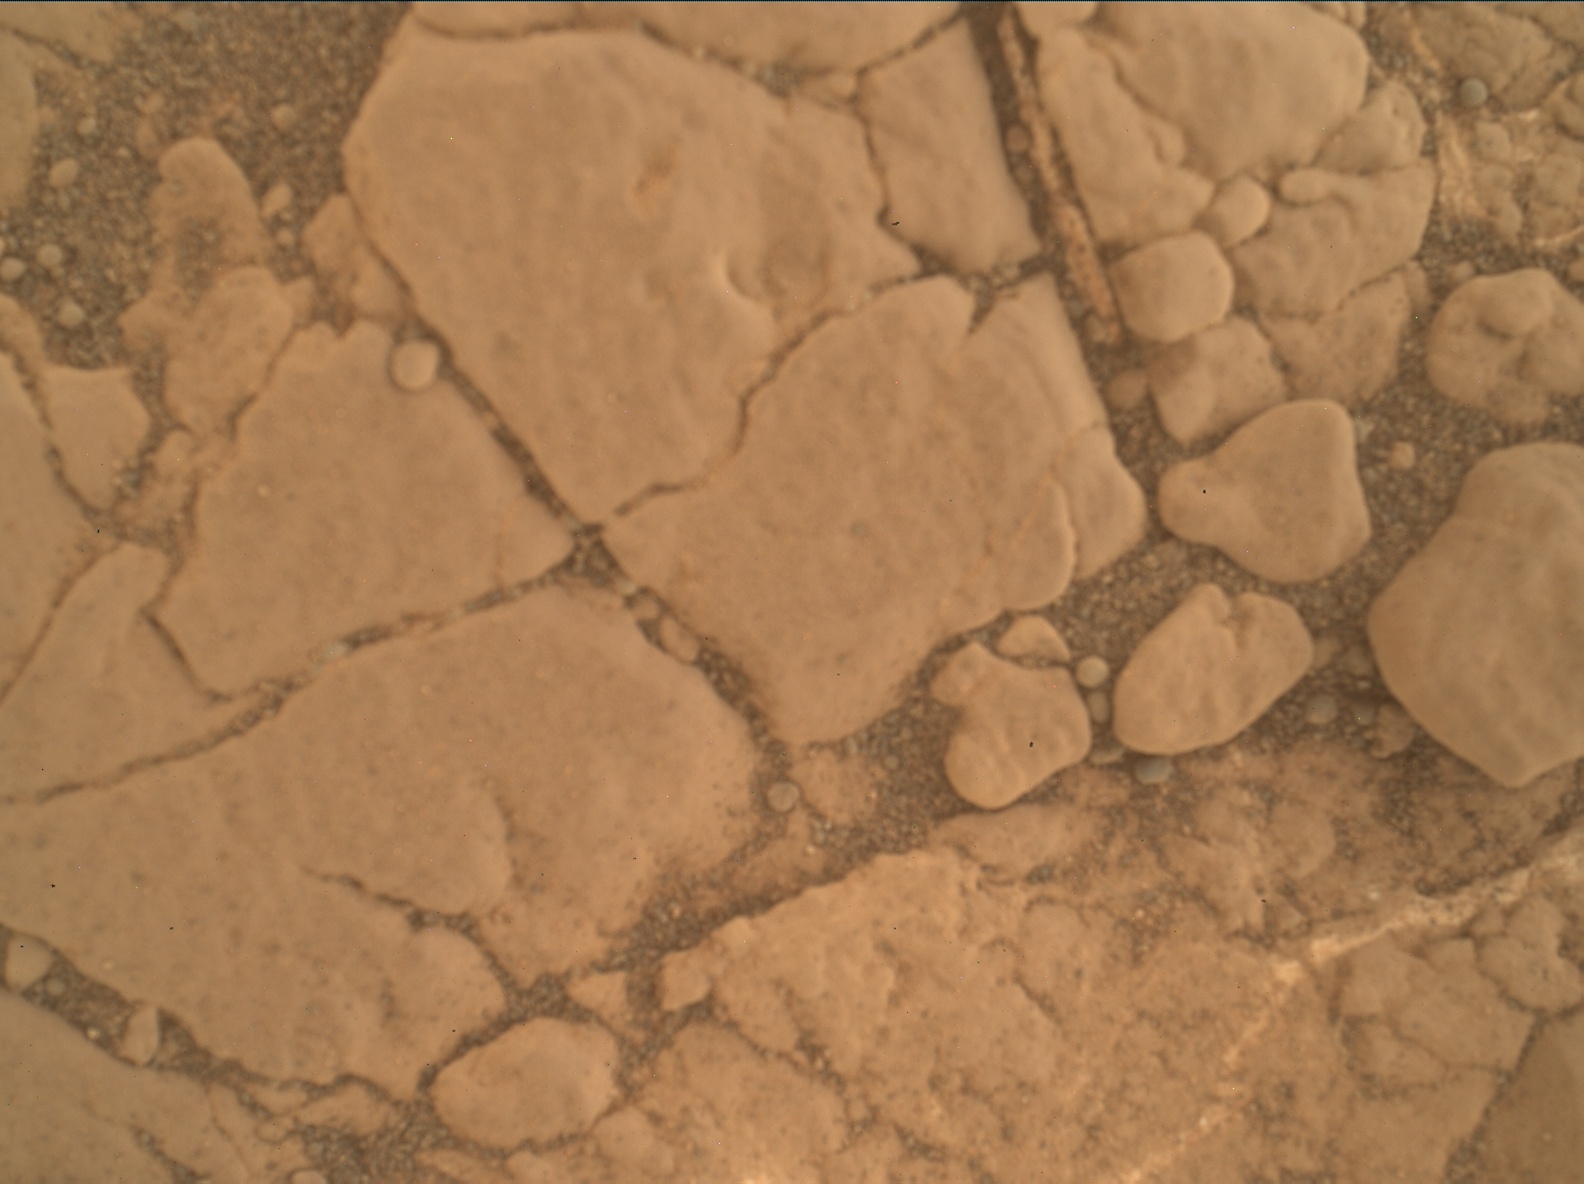 Nasa's Mars rover Curiosity acquired this image using its Mars Hand Lens Imager (MAHLI) on Sol 2577